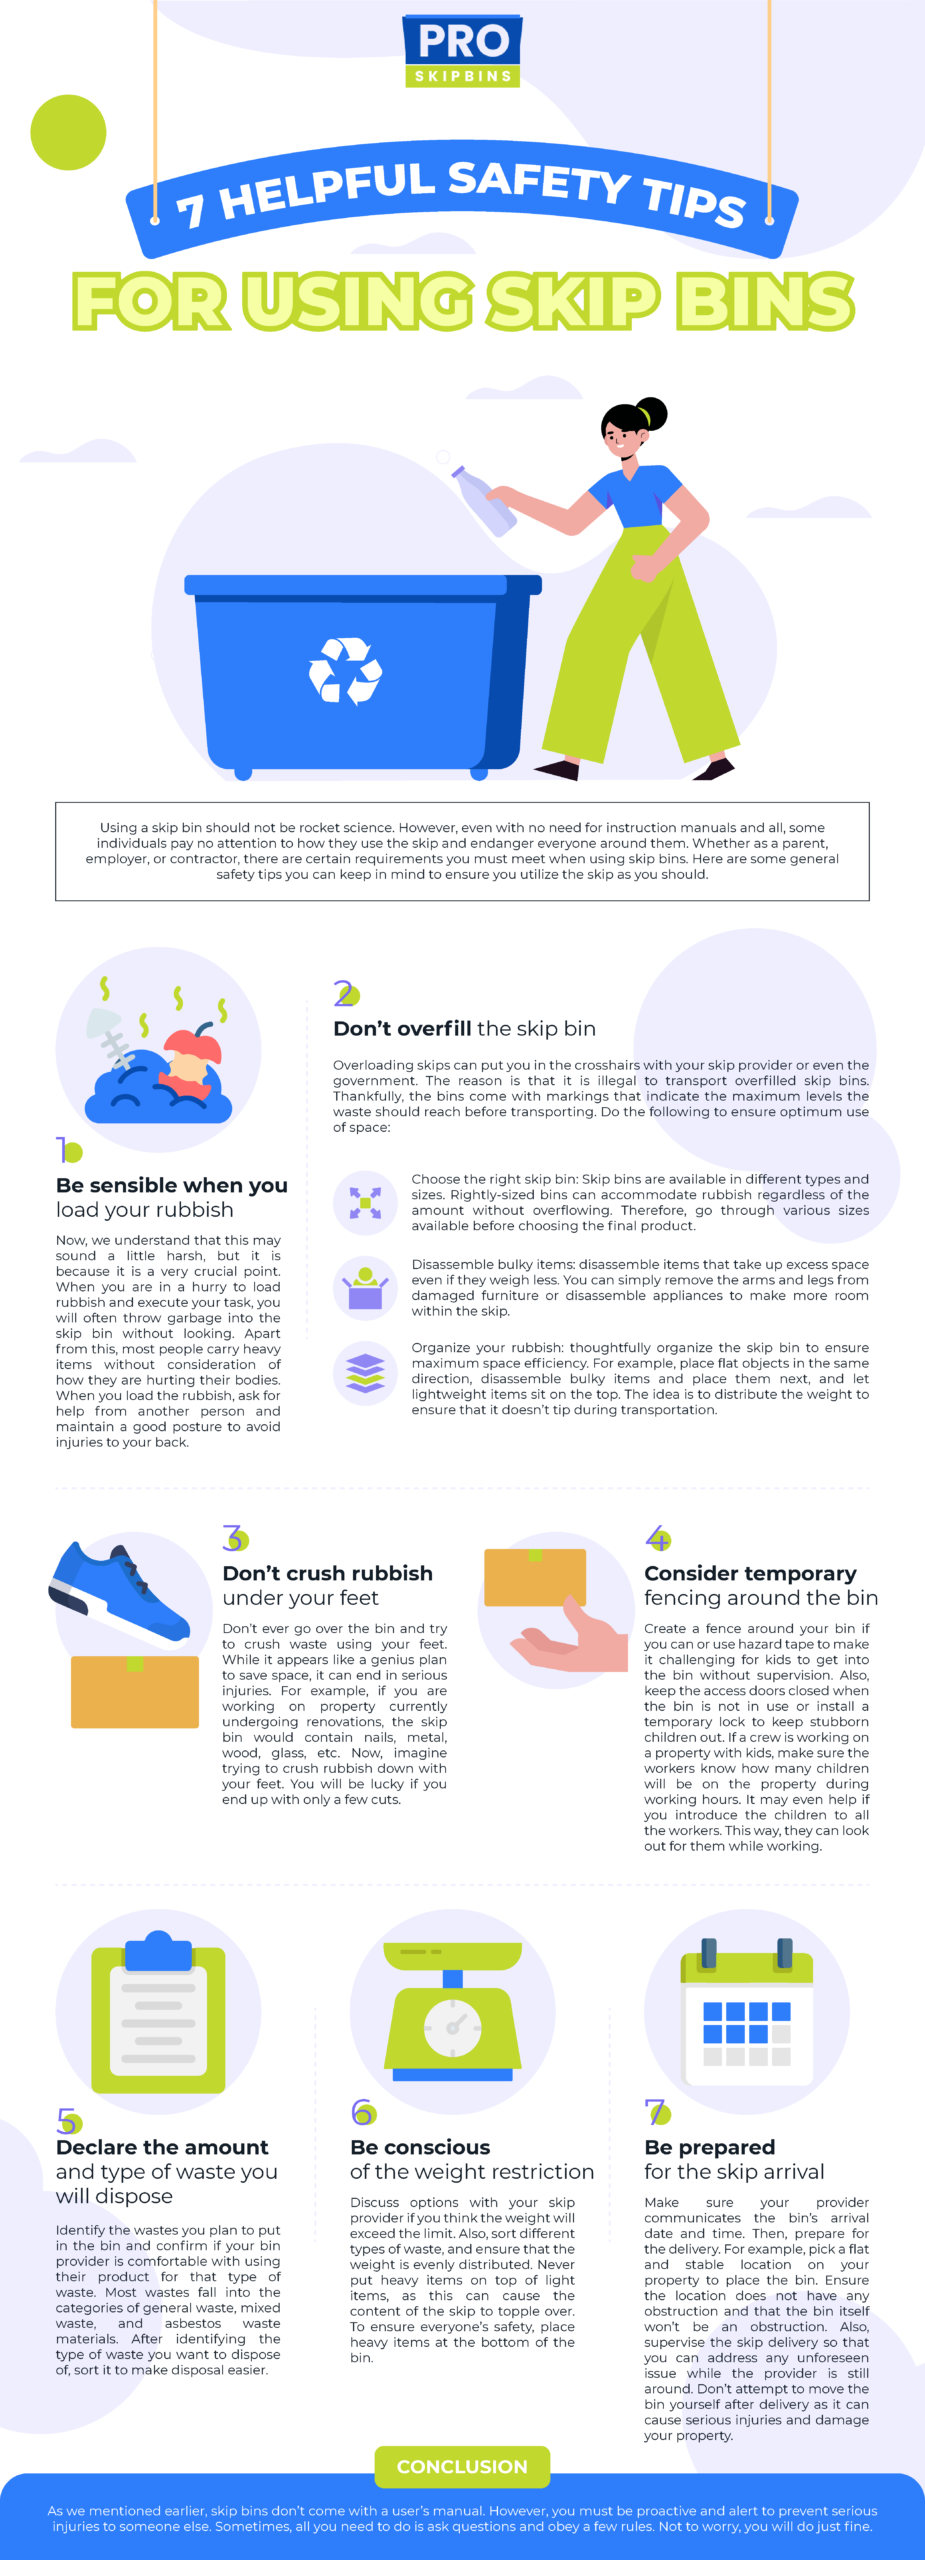 7-helpful-safety-tips-for-using-skip-bins-infographic-plaza